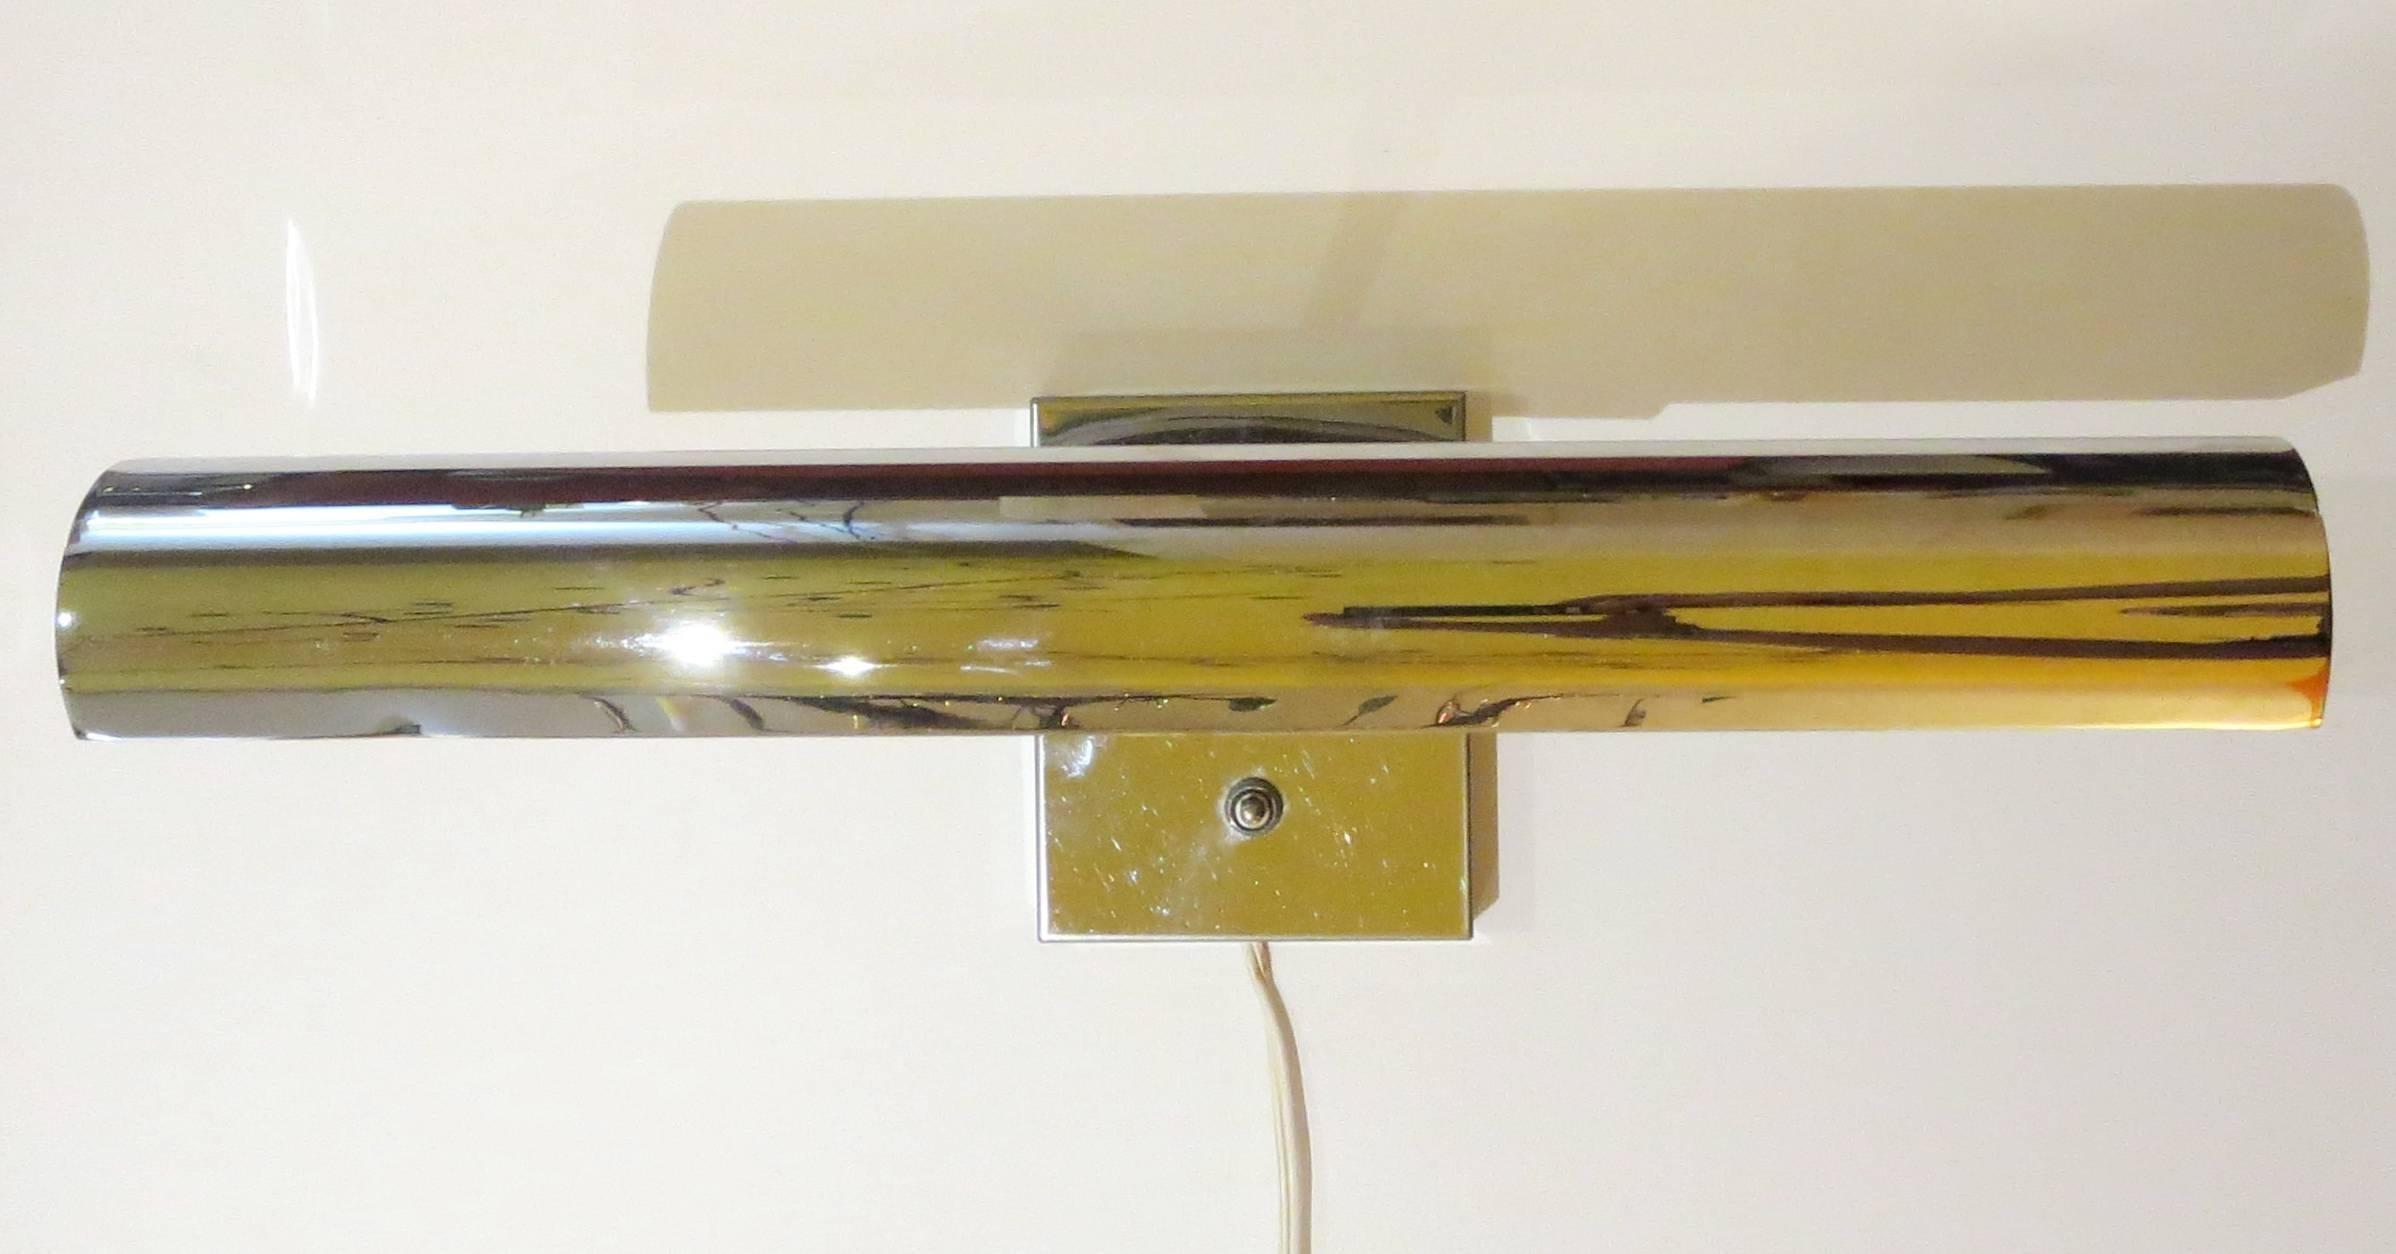 Rare hard to find double head wall sconce multidirectional shade moves up & down and side to side , perfect to place above a bed or also on top of a painting , great condition polished chrome no rust or scratches, can be hard wired or comes with a